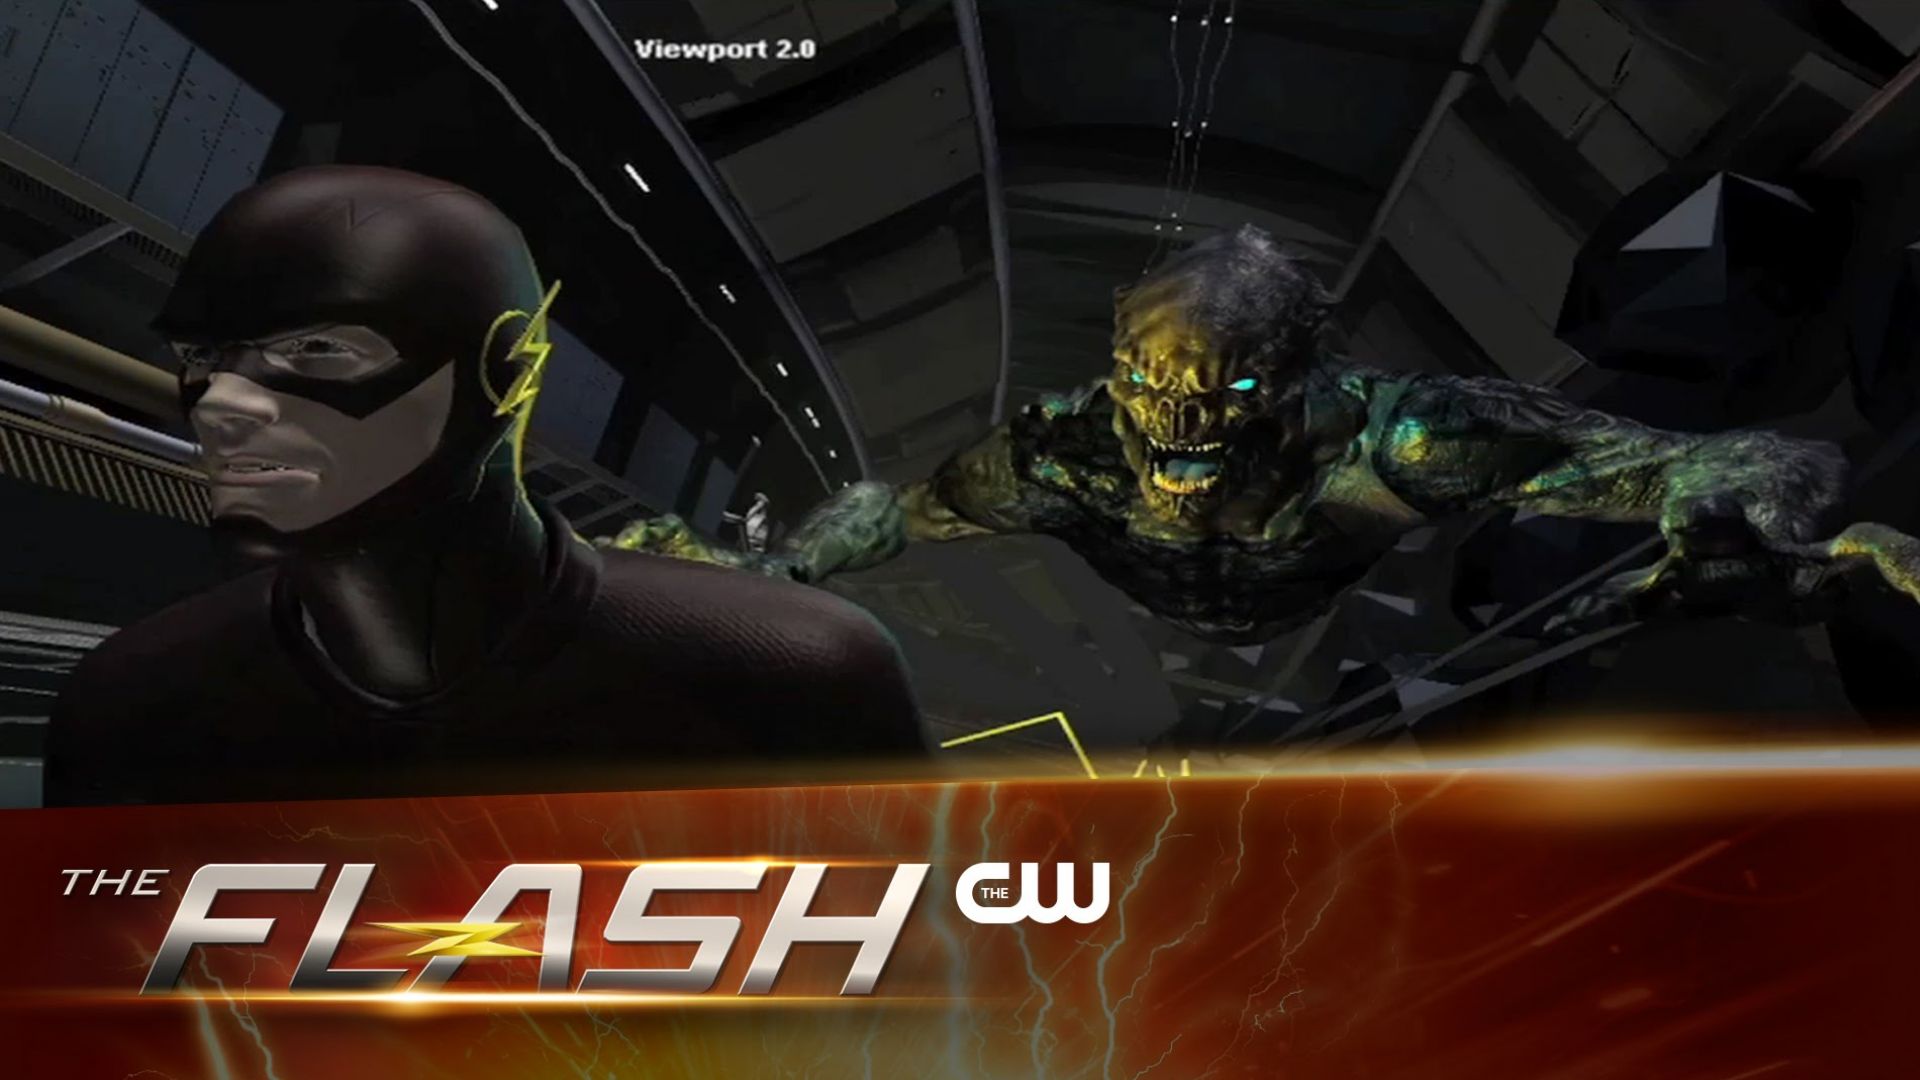 A look behind the visual effects of The Flash Season 2